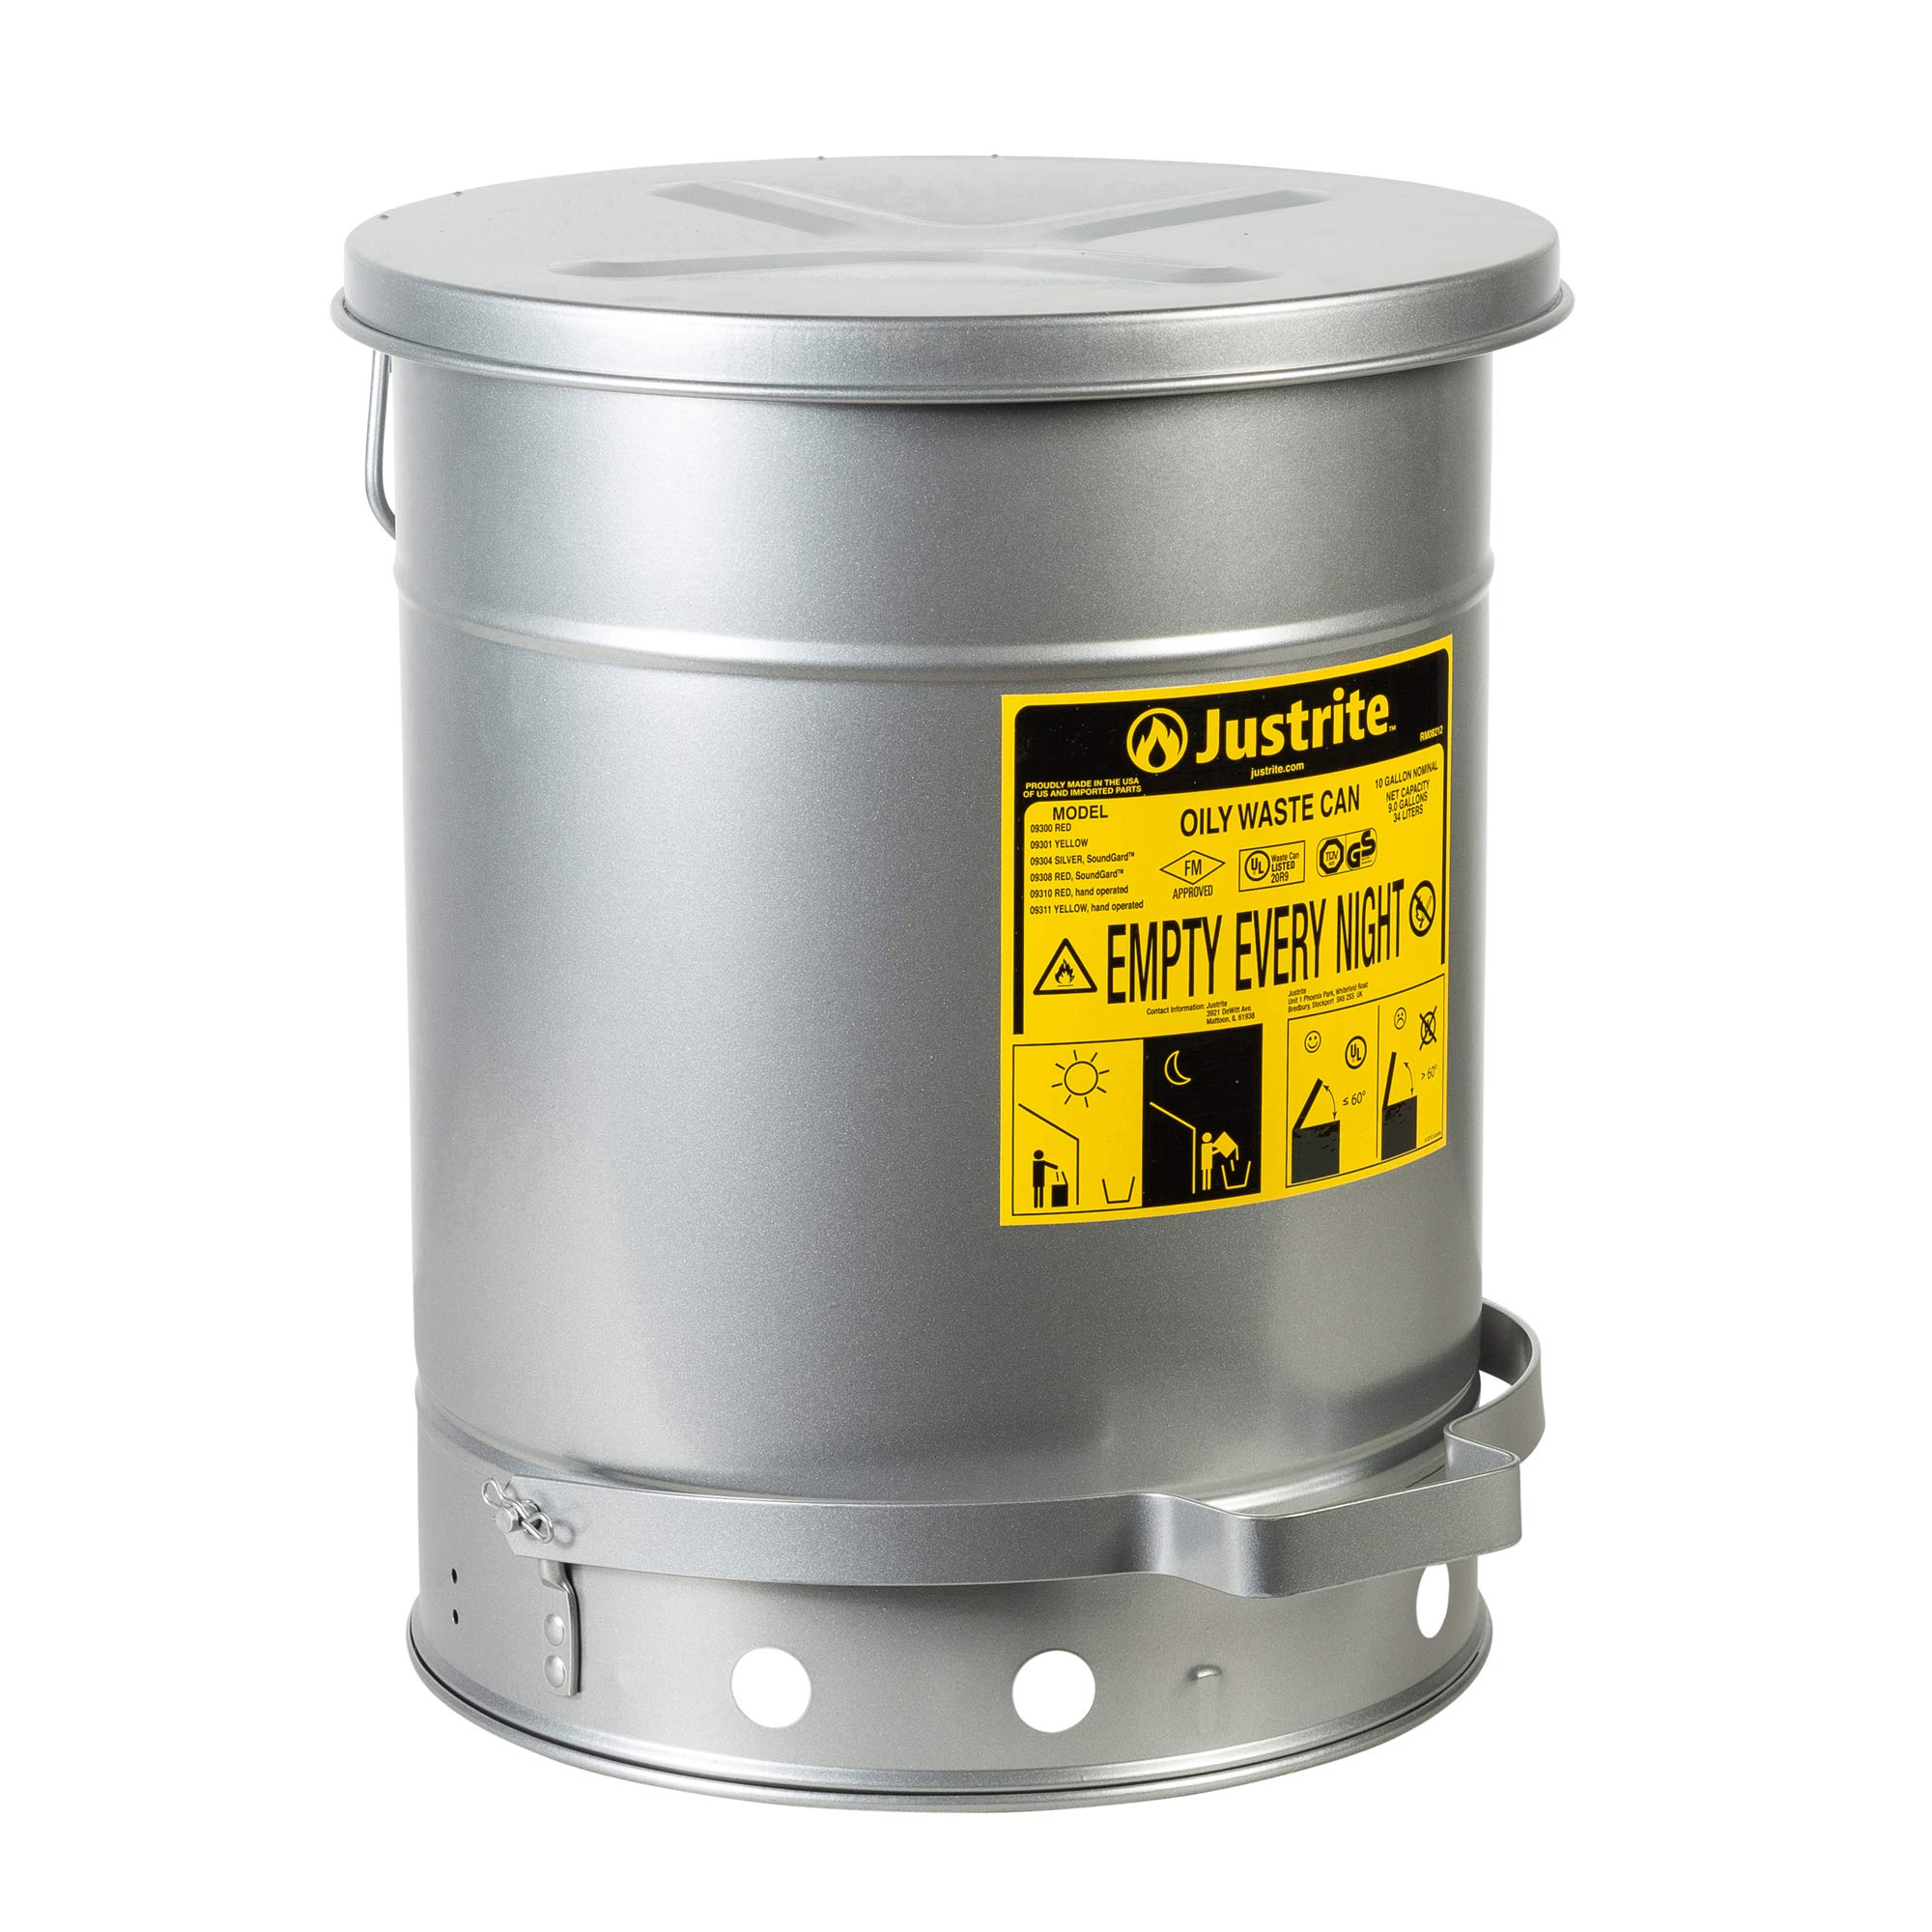 Justrite 09304 SoundGuard Galvanized Steel Oily Waste Safety Can with Foot Operated Cover, 10 Gallon Capacity, Silver